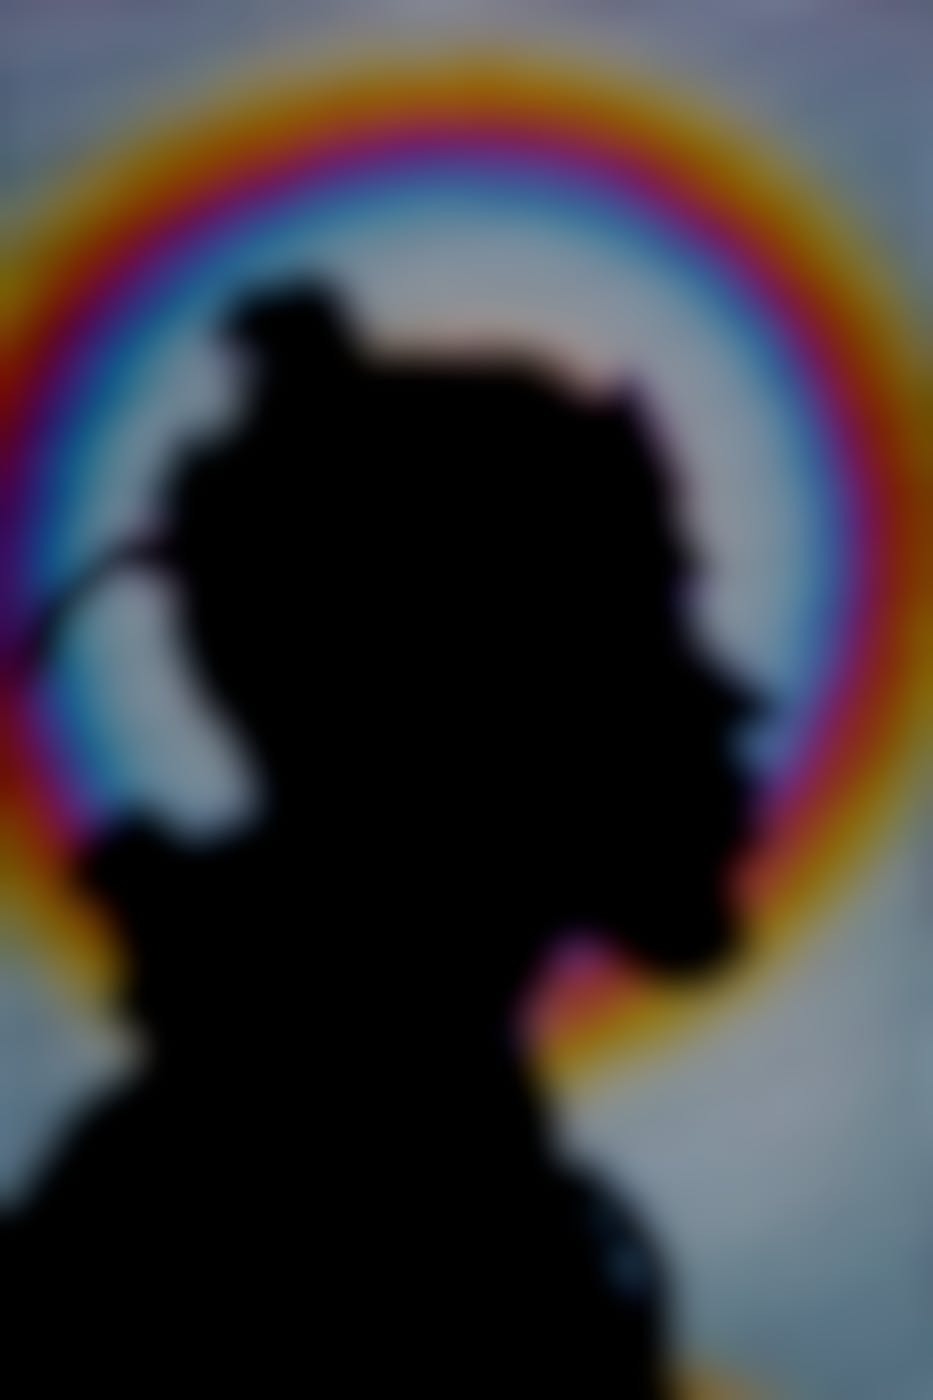 The silhouette of a man against a digital background